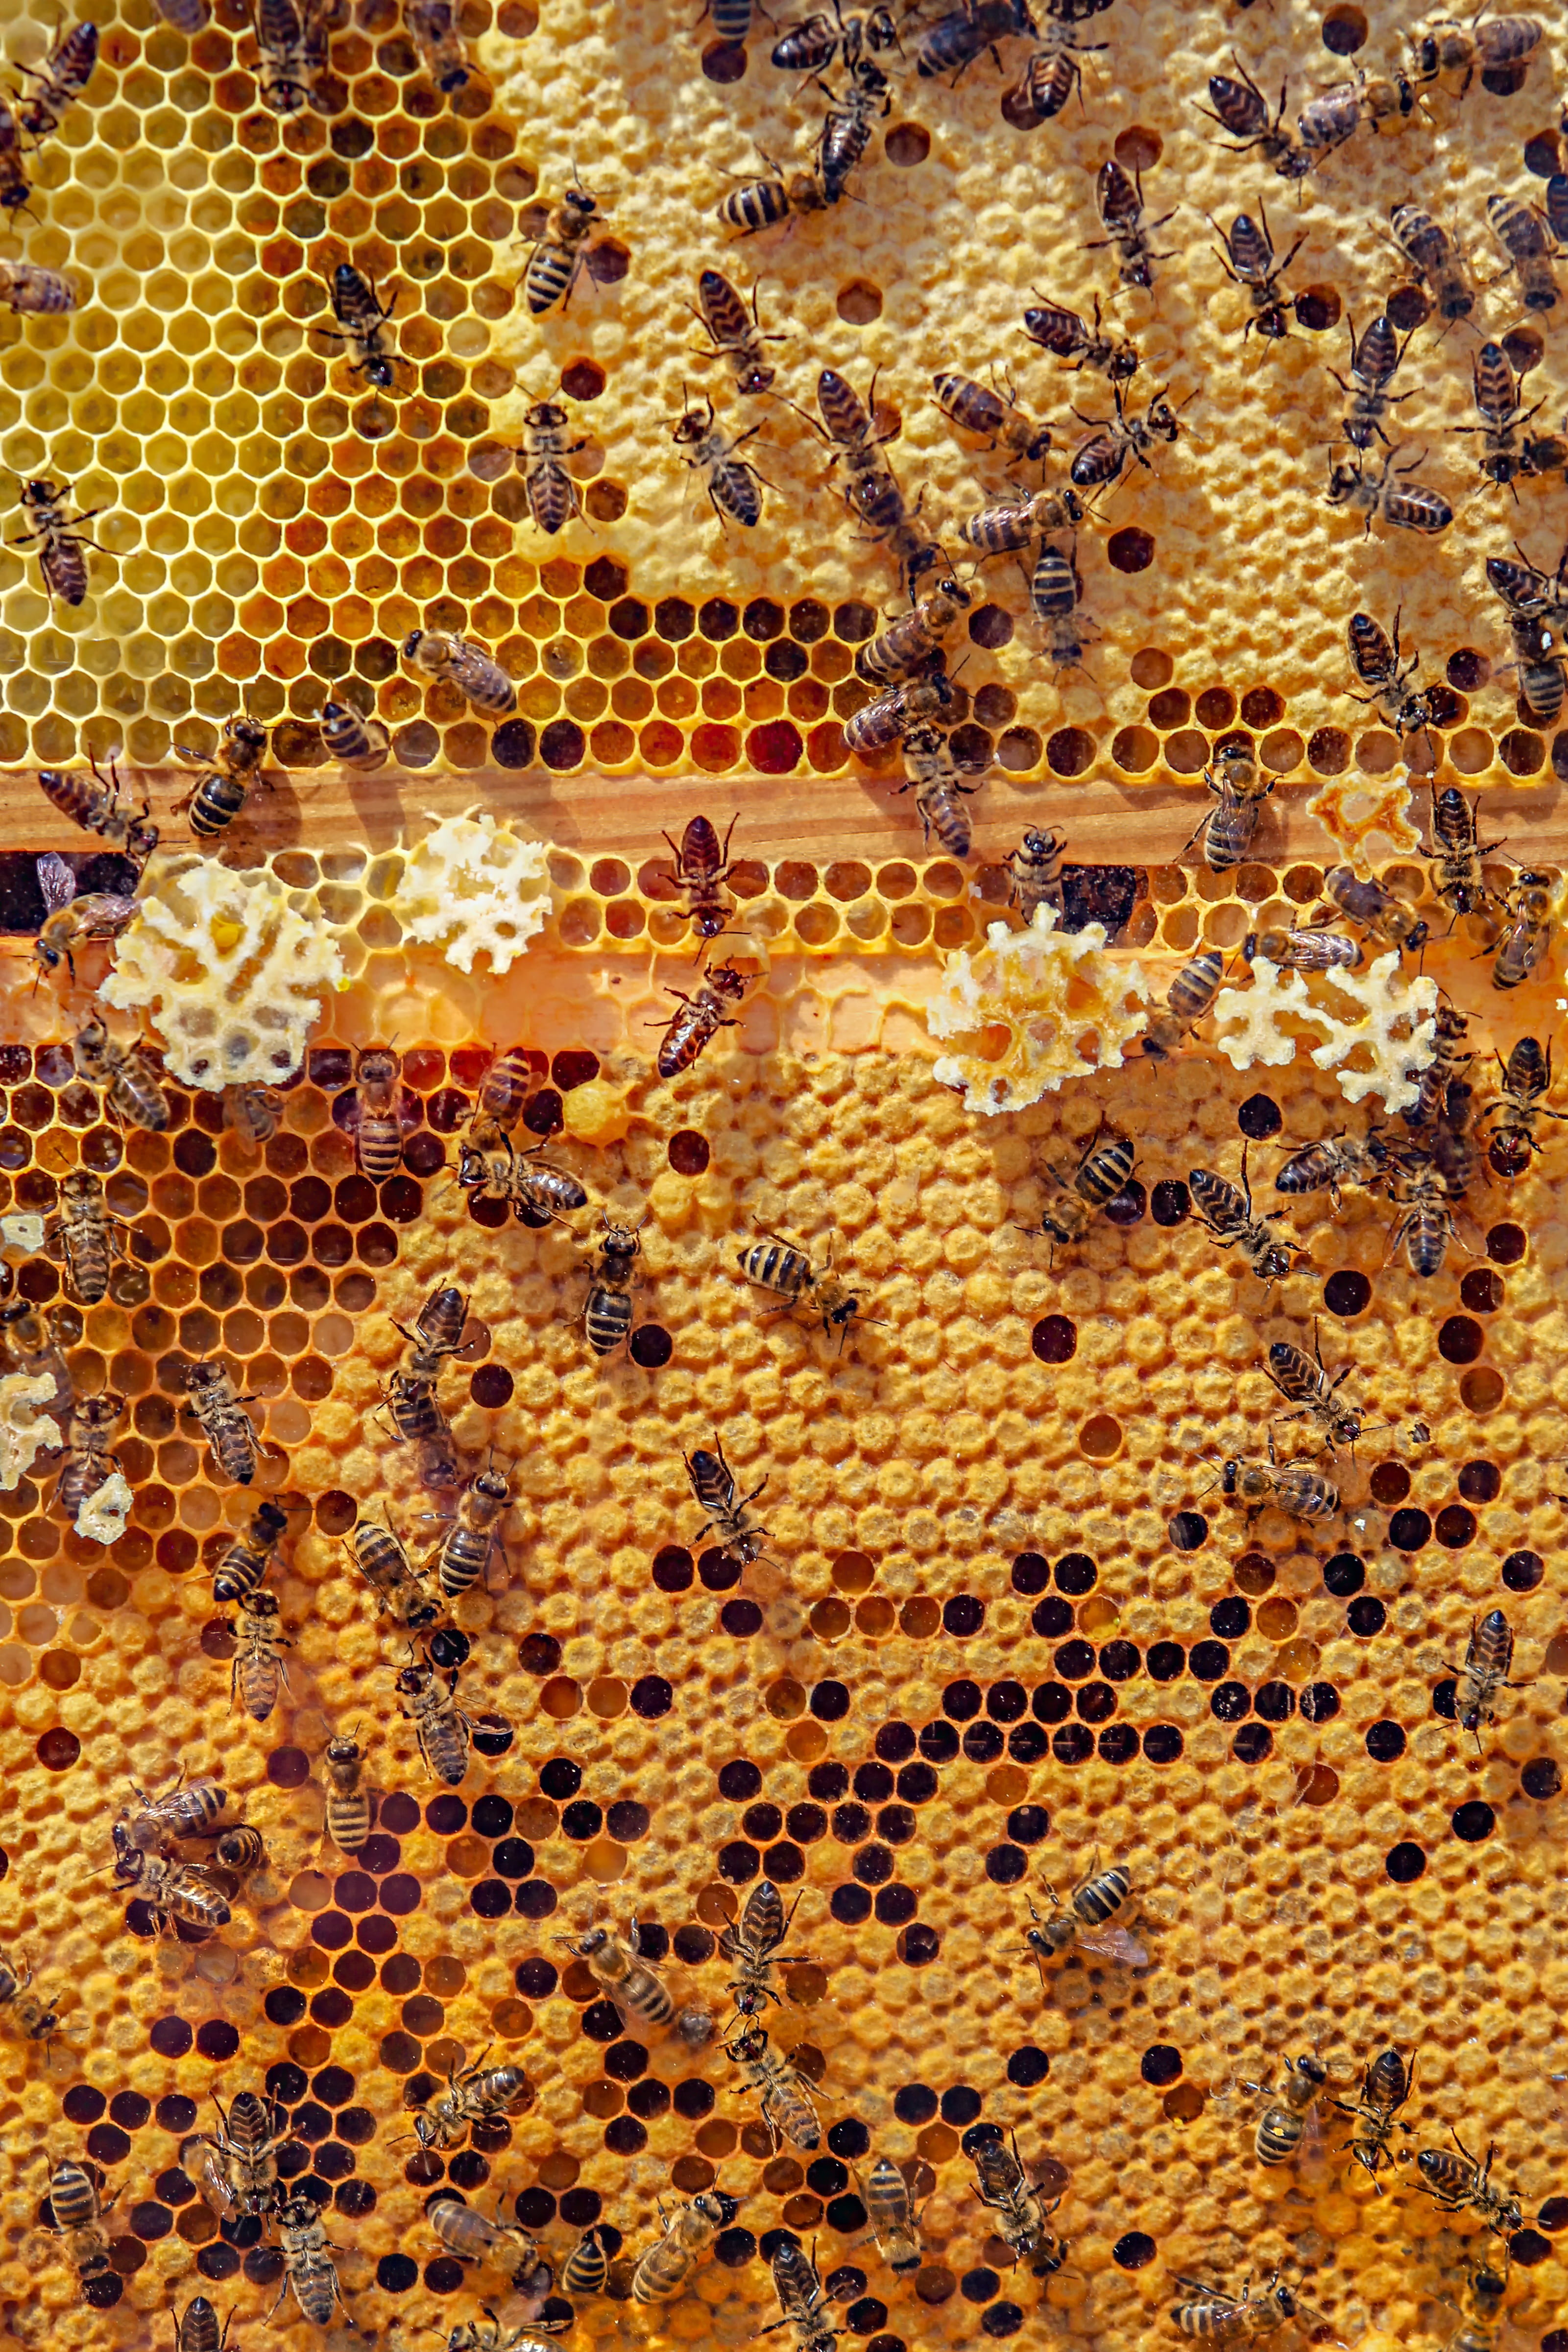 bees, nature, animals, honeycomb, honey bee, insect, close up